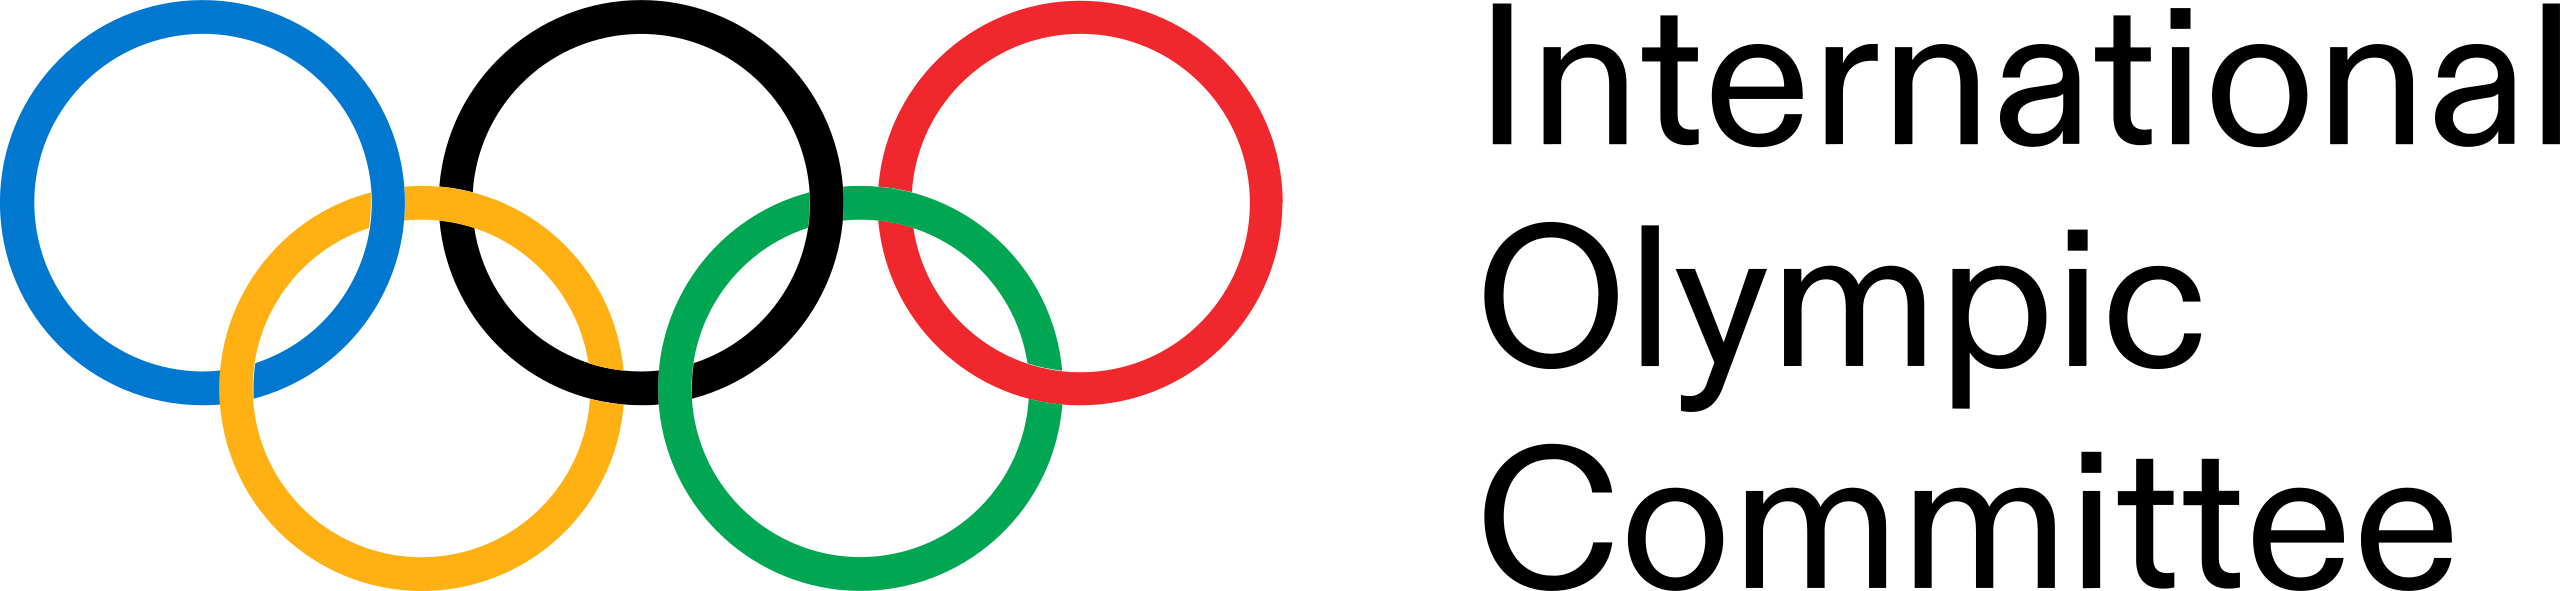 File:International Olympic Committee logo 2021.svg - Wikimedia Commons